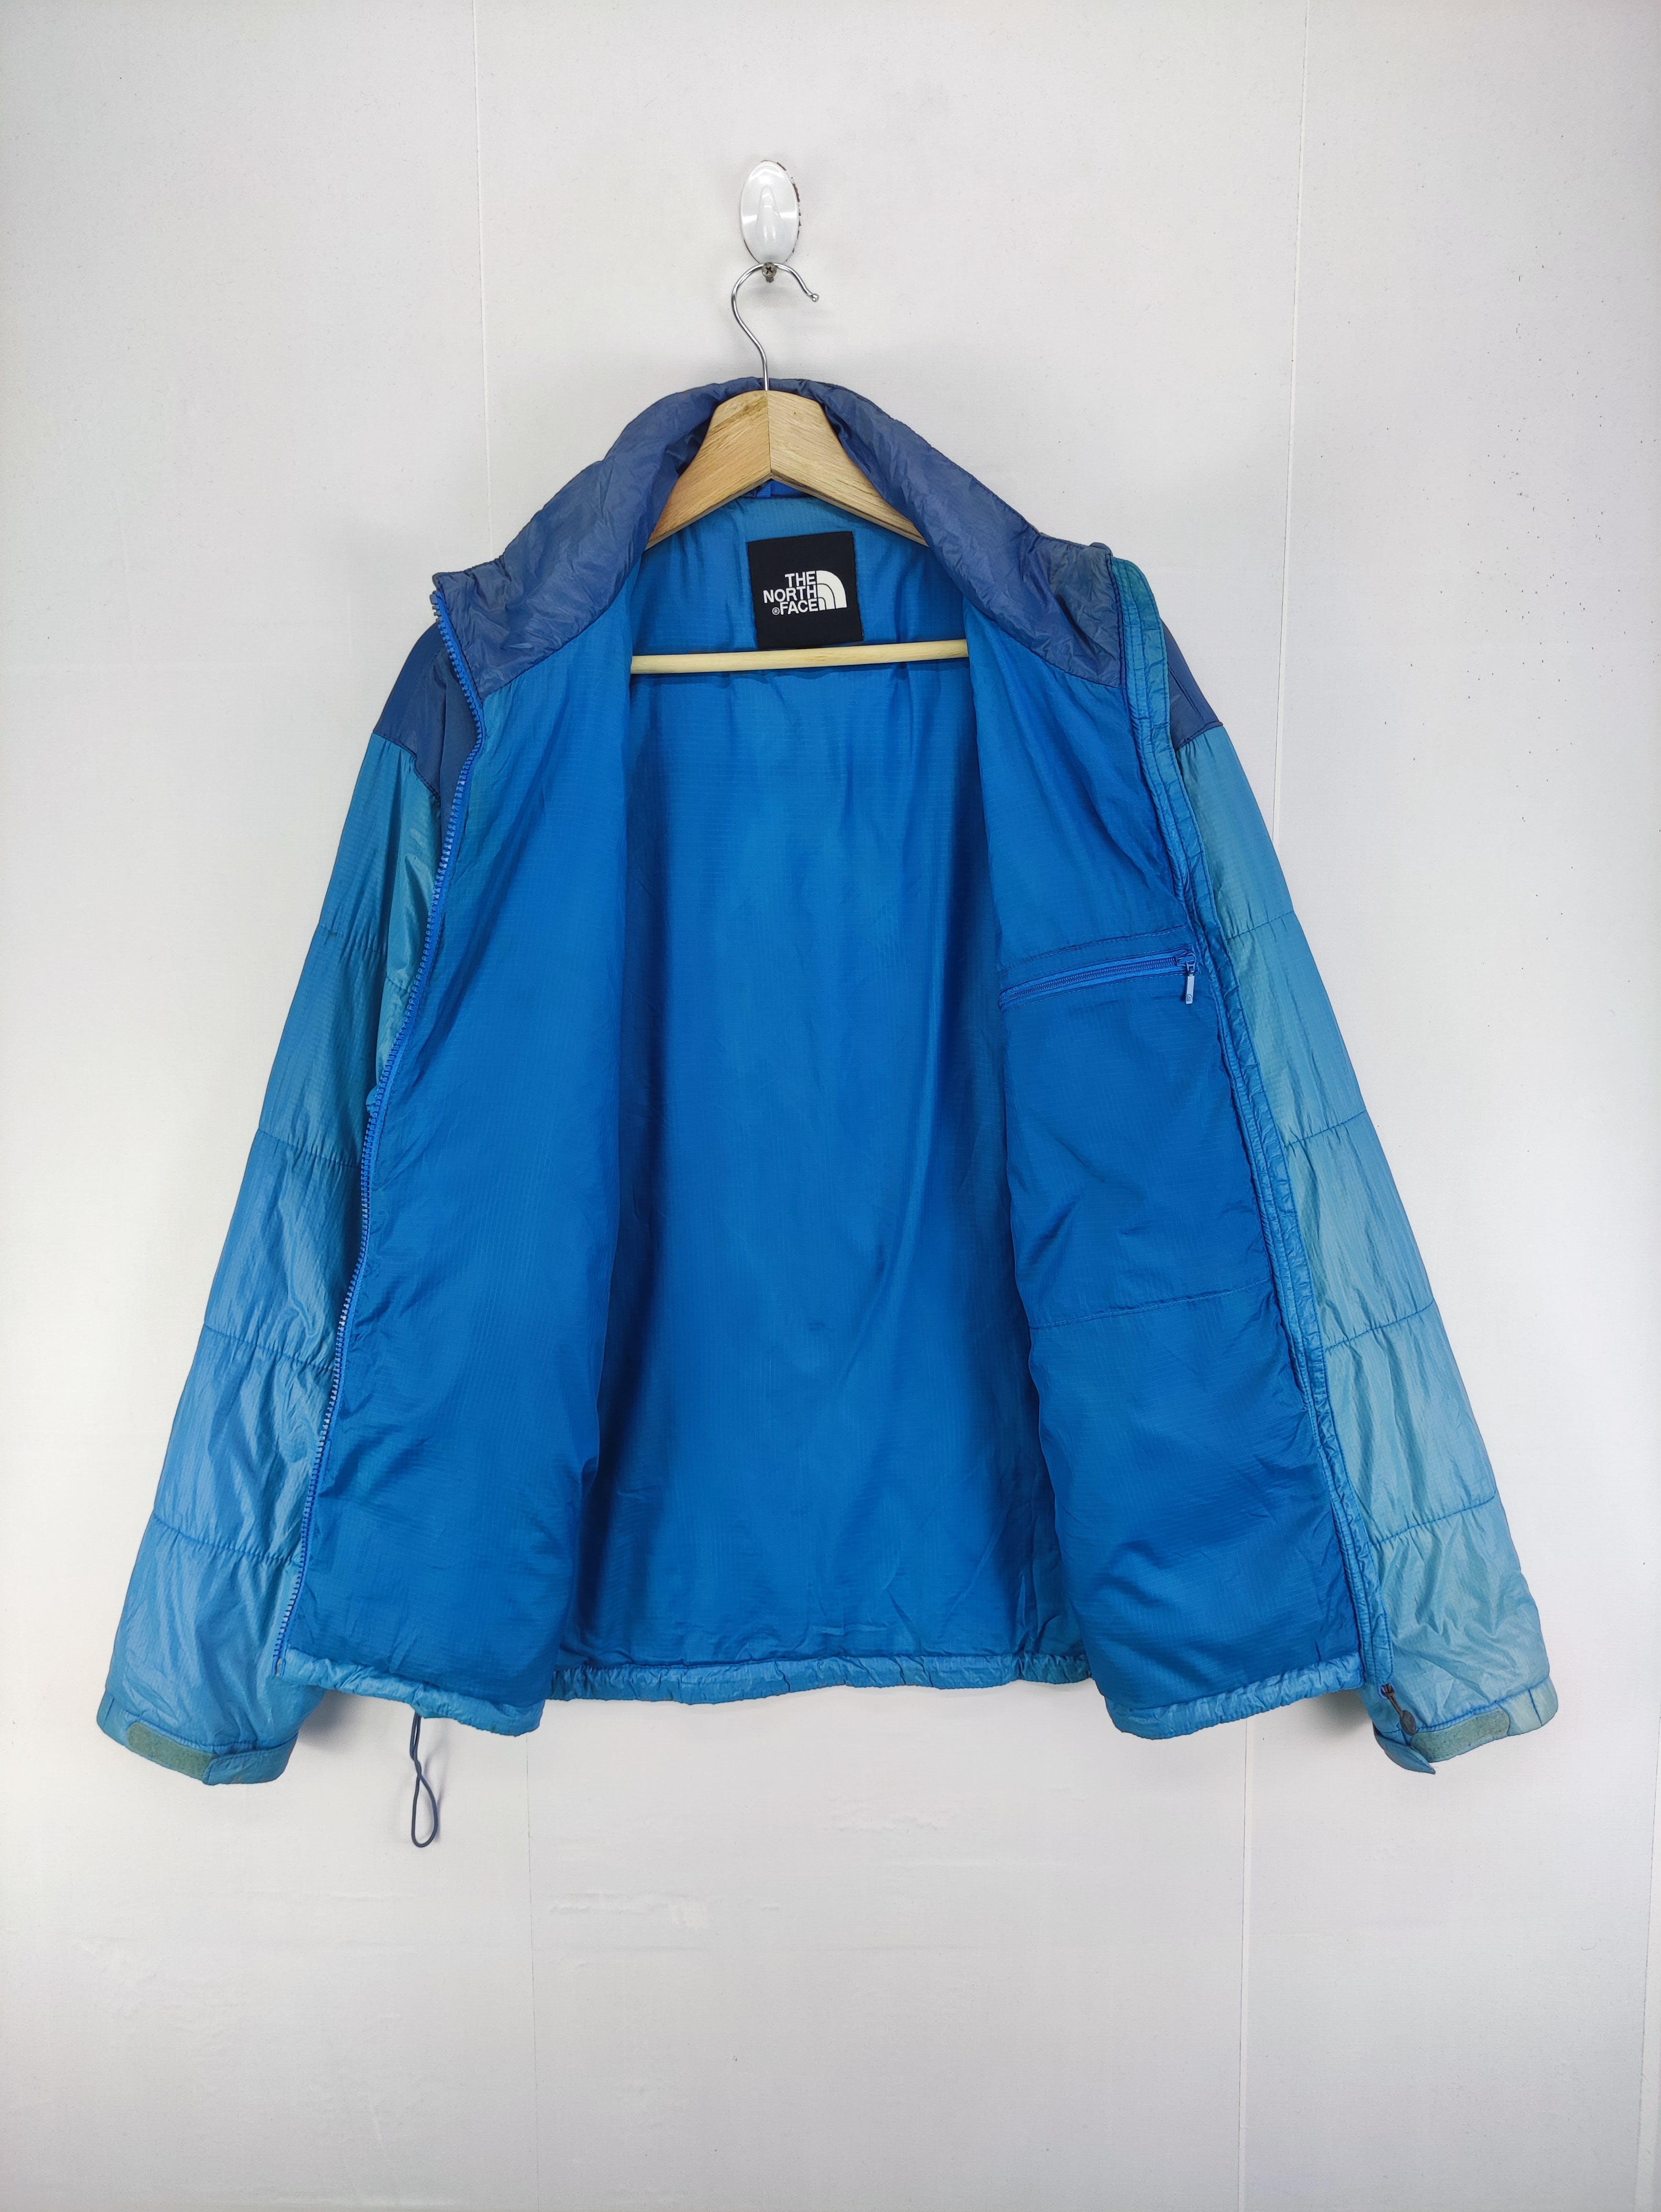 Outdoor Style Go Out! - The North Face Jacket Zipper - 8